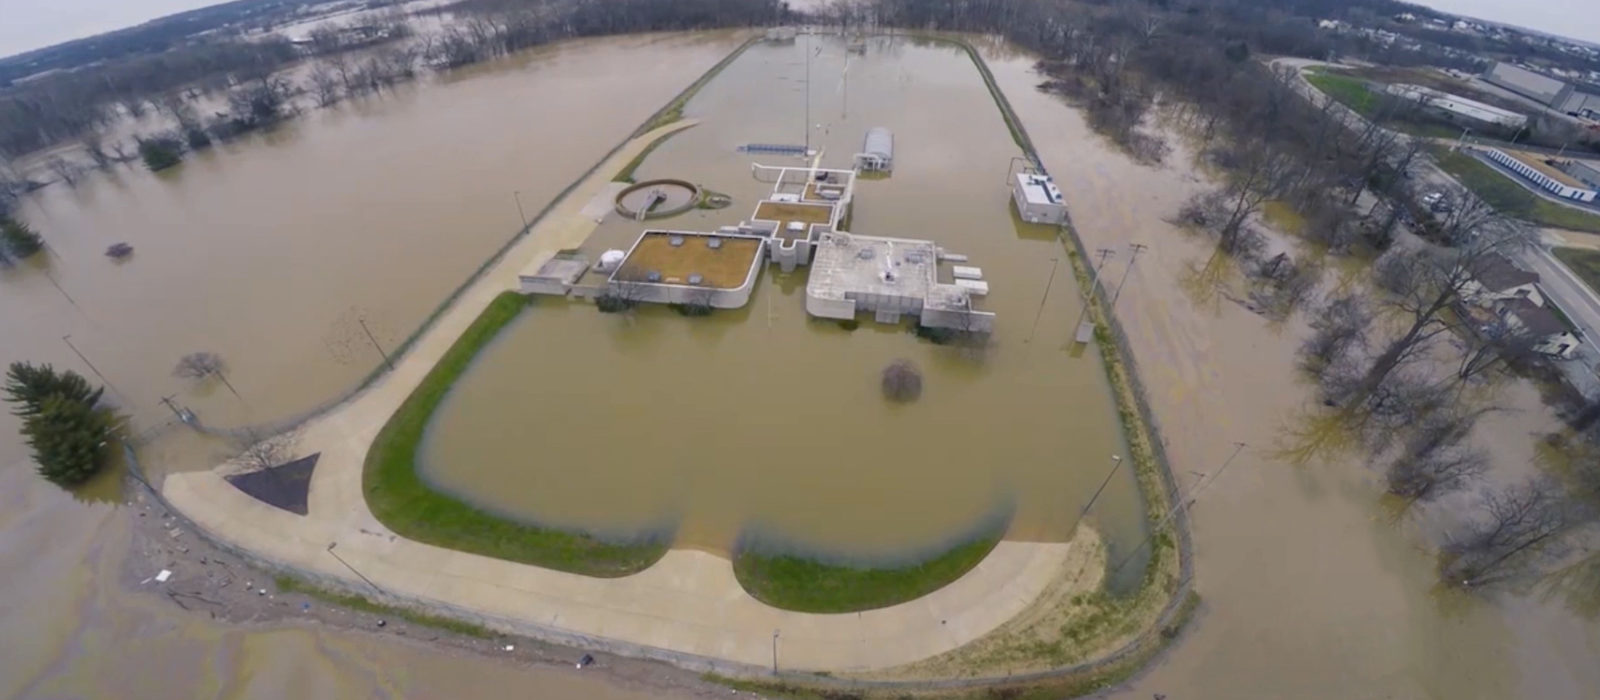 Aerial view of a flooded Wastewater Treatment Plant